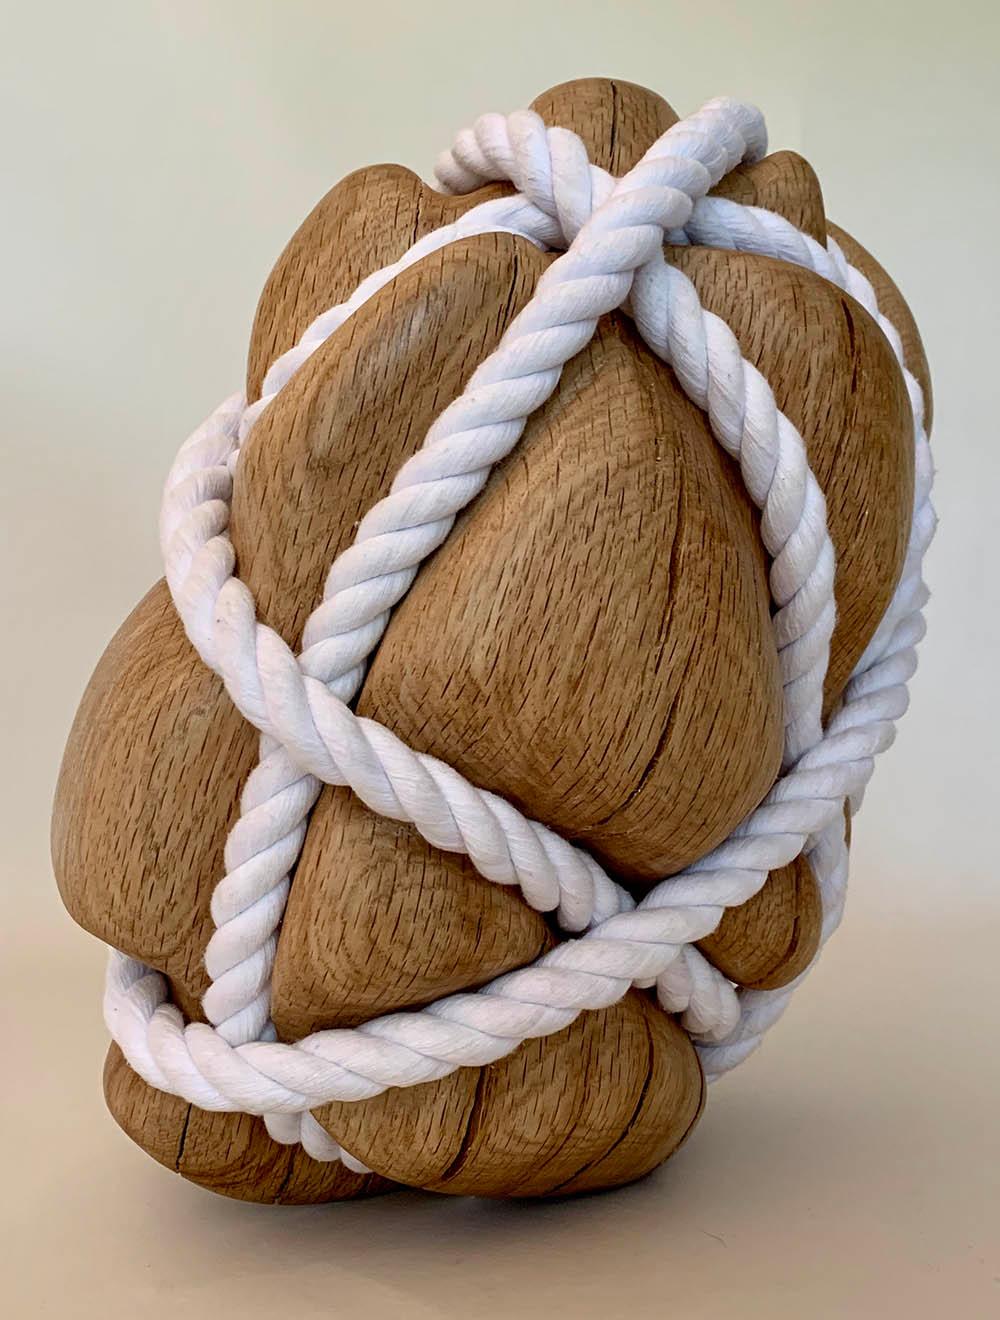 Bound Heart is a unique oak wood and cotton cord sculpture by contemporary artist Peter Brooke-Ball, dimensions are 19 × 34 × 26 cm (7.5 × 13.4 × 10.2 in).  
The sculpture comes with a certificate of authenticity.

This work represents a bound heart